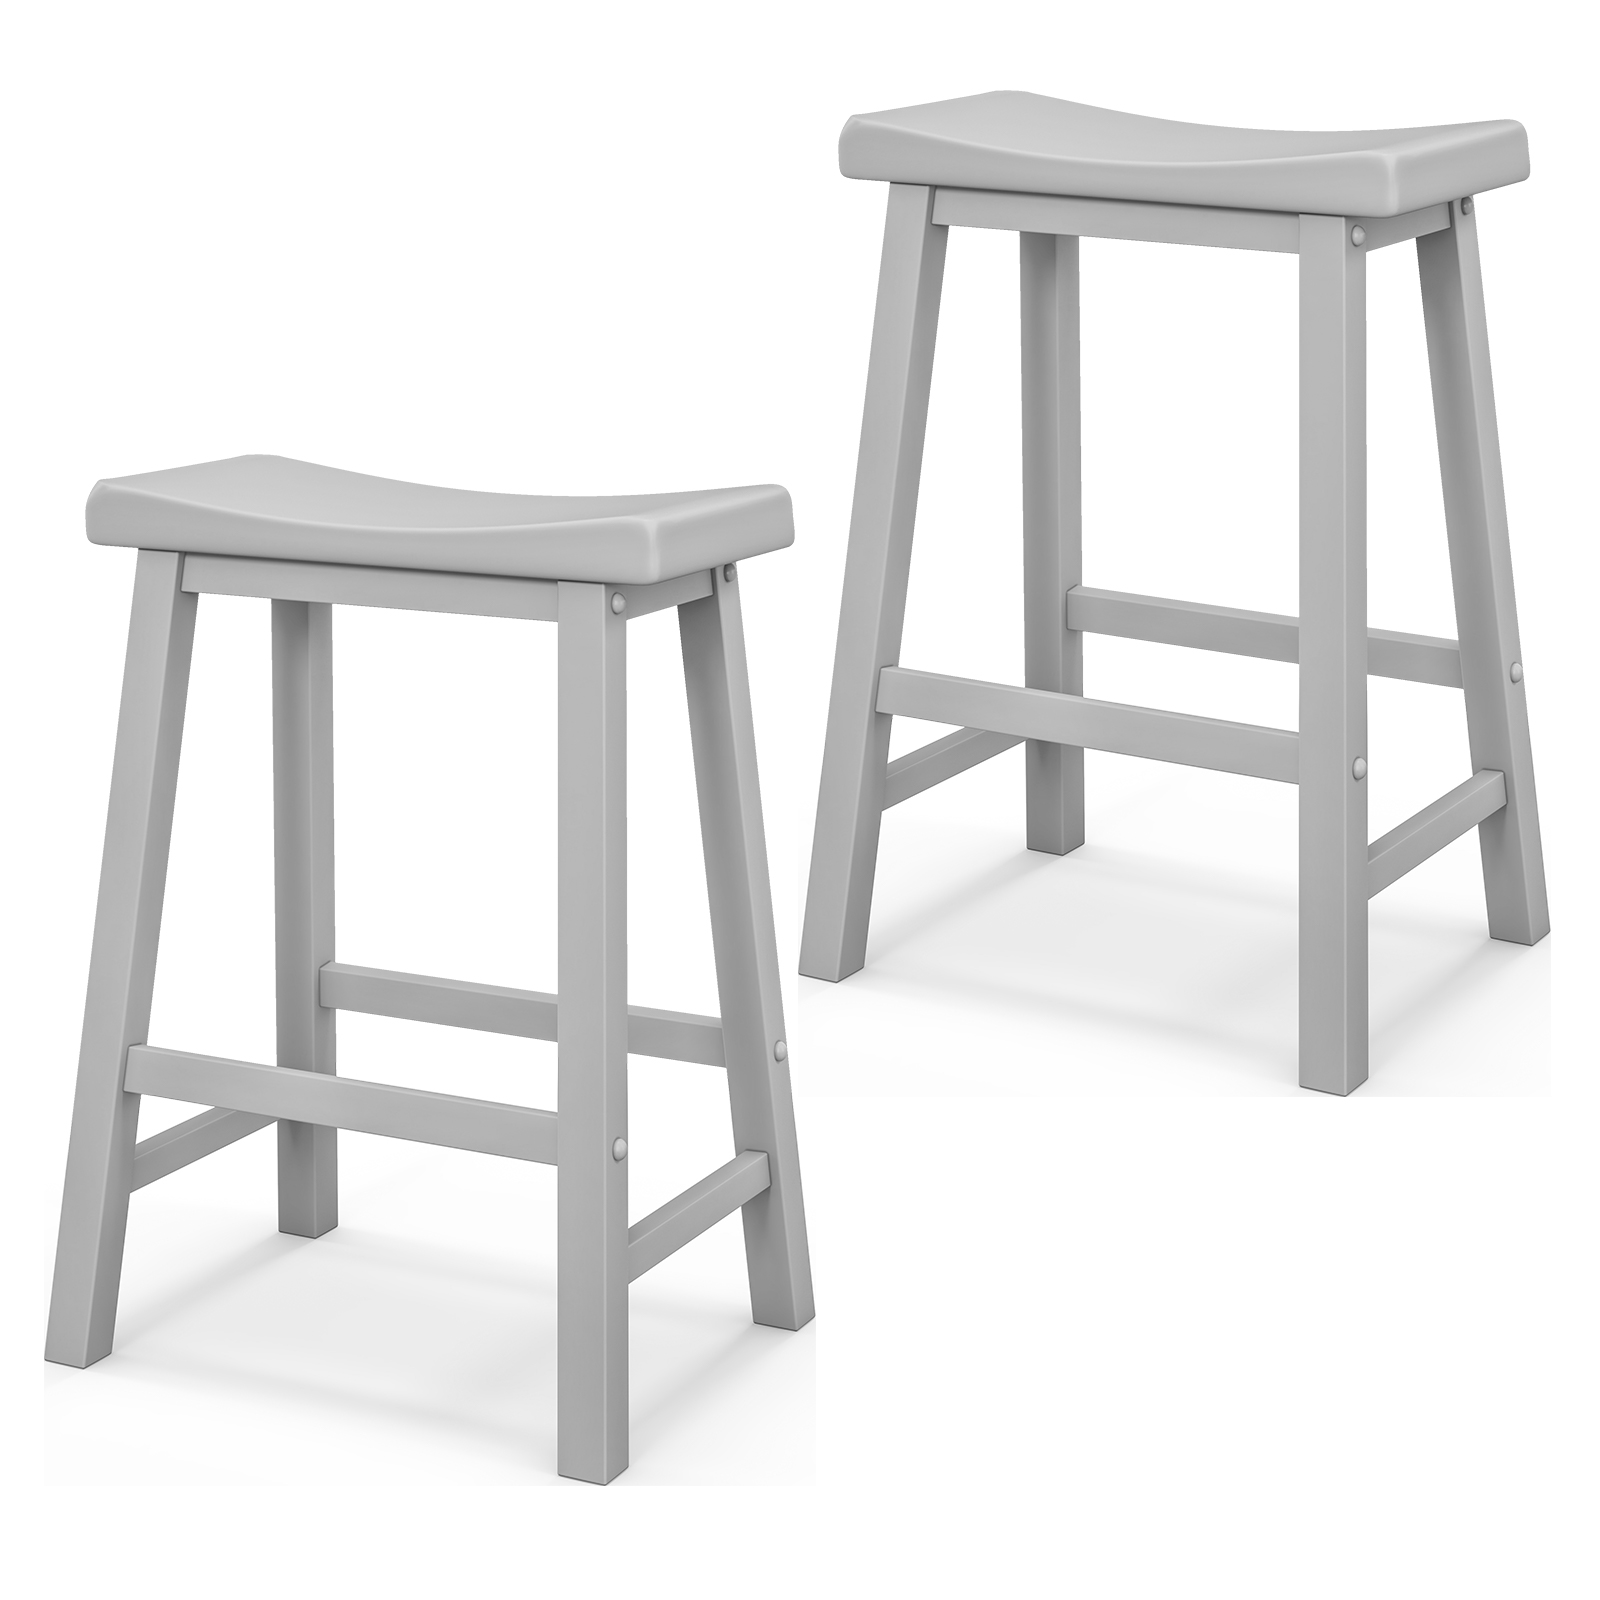 Saddle Stools Set of 2 with Solid Wood Legs and Footrests-Grey